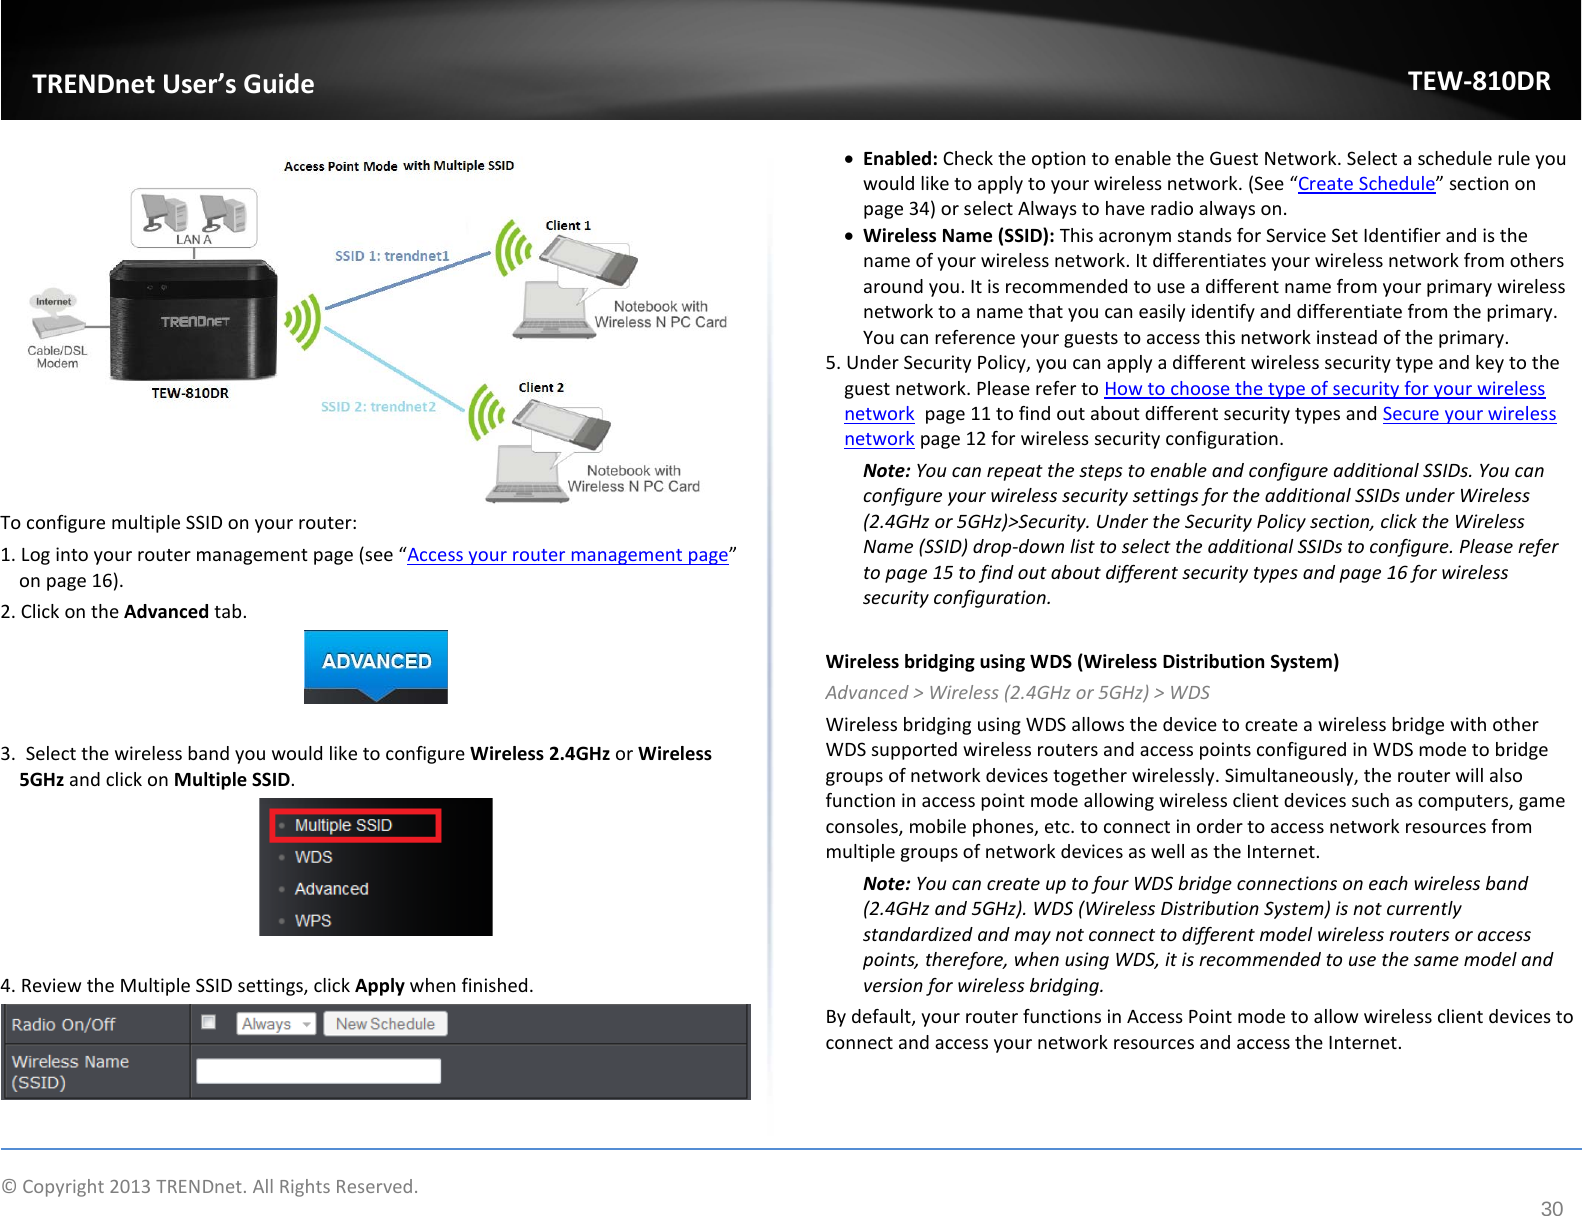             © Copyright 2013 TRENDnet. All Rights Reserved.       TRENDnet User’s Guide TEW-810DR 30  To configure multiple SSID on your router: 1. Log into your router management page (see “Access your router management page” on page 16). 2. Click on the Advanced tab.   3.  Select the wireless band you would like to configure Wireless 2.4GHz or Wireless 5GHz and click on Multiple SSID.   4. Review the Multiple SSID settings, click Apply when finished.   • Enabled: Check the option to enable the Guest Network. Select a schedule rule you would like to apply to your wireless network. (See “Create Schedule” section on page 34) or select Always to have radio always on. • Wireless Name (SSID): This acronym stands for Service Set Identifier and is the name of your wireless network. It differentiates your wireless network from others around you. It is recommended to use a different name from your primary wireless network to a name that you can easily identify and differentiate from the primary. You can reference your guests to access this network instead of the primary. 5. Under Security Policy, you can apply a different wireless security type and key to the guest network. Please refer to How to choose the type of security for your wireless network  page 11 to find out about different security types and Secure your wireless network page 12 for wireless security configuration. Note: You can repeat the steps to enable and configure additional SSIDs. You can configure your wireless security settings for the additional SSIDs under Wireless (2.4GHz or 5GHz)&gt;Security. Under the Security Policy section, click the Wireless Name (SSID) drop-down list to select the additional SSIDs to configure. Please refer to page 15 to find out about different security types and page 16 for wireless security configuration.  Wireless bridging using WDS (Wireless Distribution System) Advanced &gt; Wireless (2.4GHz or 5GHz) &gt; WDS Wireless bridging using WDS allows the device to create a wireless bridge with other WDS supported wireless routers and access points configured in WDS mode to bridge groups of network devices together wirelessly. Simultaneously, the router will also function in access point mode allowing wireless client devices such as computers, game consoles, mobile phones, etc. to connect in order to access network resources from multiple groups of network devices as well as the Internet.  Note: You can create up to four WDS bridge connections on each wireless band (2.4GHz and 5GHz). WDS (Wireless Distribution System) is not currently standardized and may not connect to different model wireless routers or access points, therefore, when using WDS, it is recommended to use the same model and version for wireless bridging. By default, your router functions in Access Point mode to allow wireless client devices to connect and access your network resources and access the Internet. 